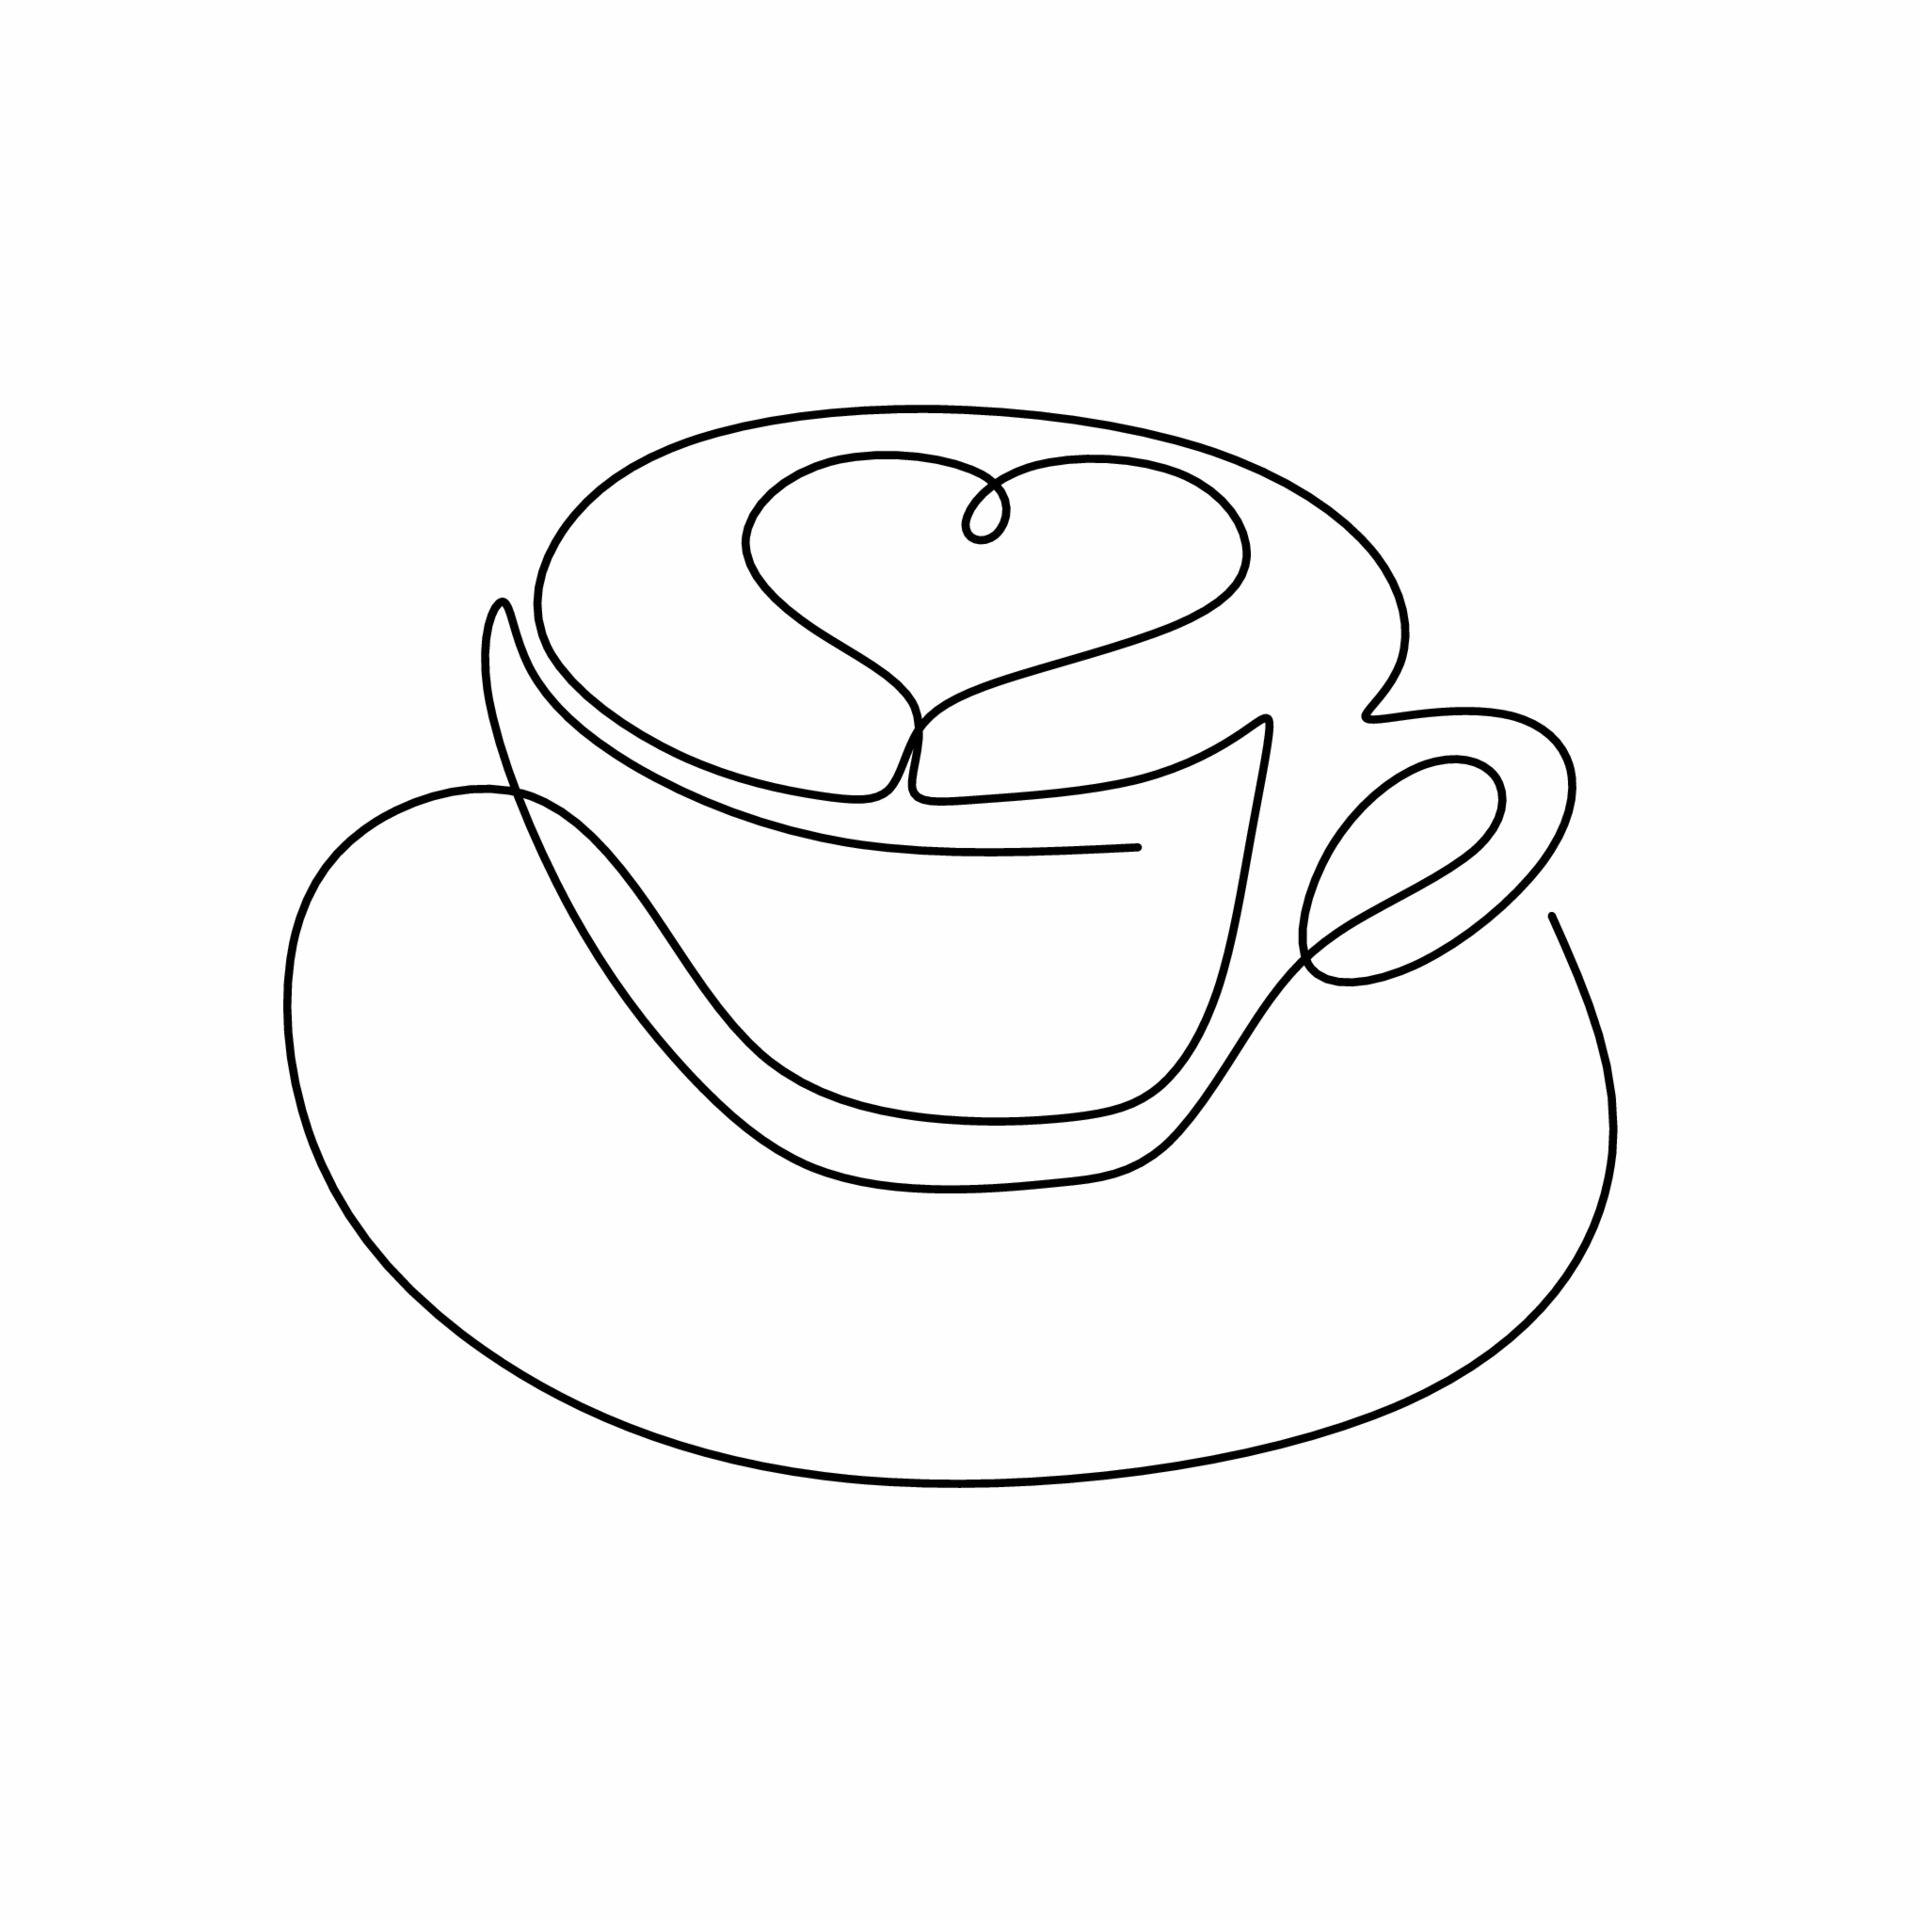 Continuous One Line Art Drawing Of Coffee Warm A Cup Of Coffee With Love Sign Isolated On White Background Coffees Cup Shop Concept Coffee Addict Minimalism Design Vector Illustration Vector Art